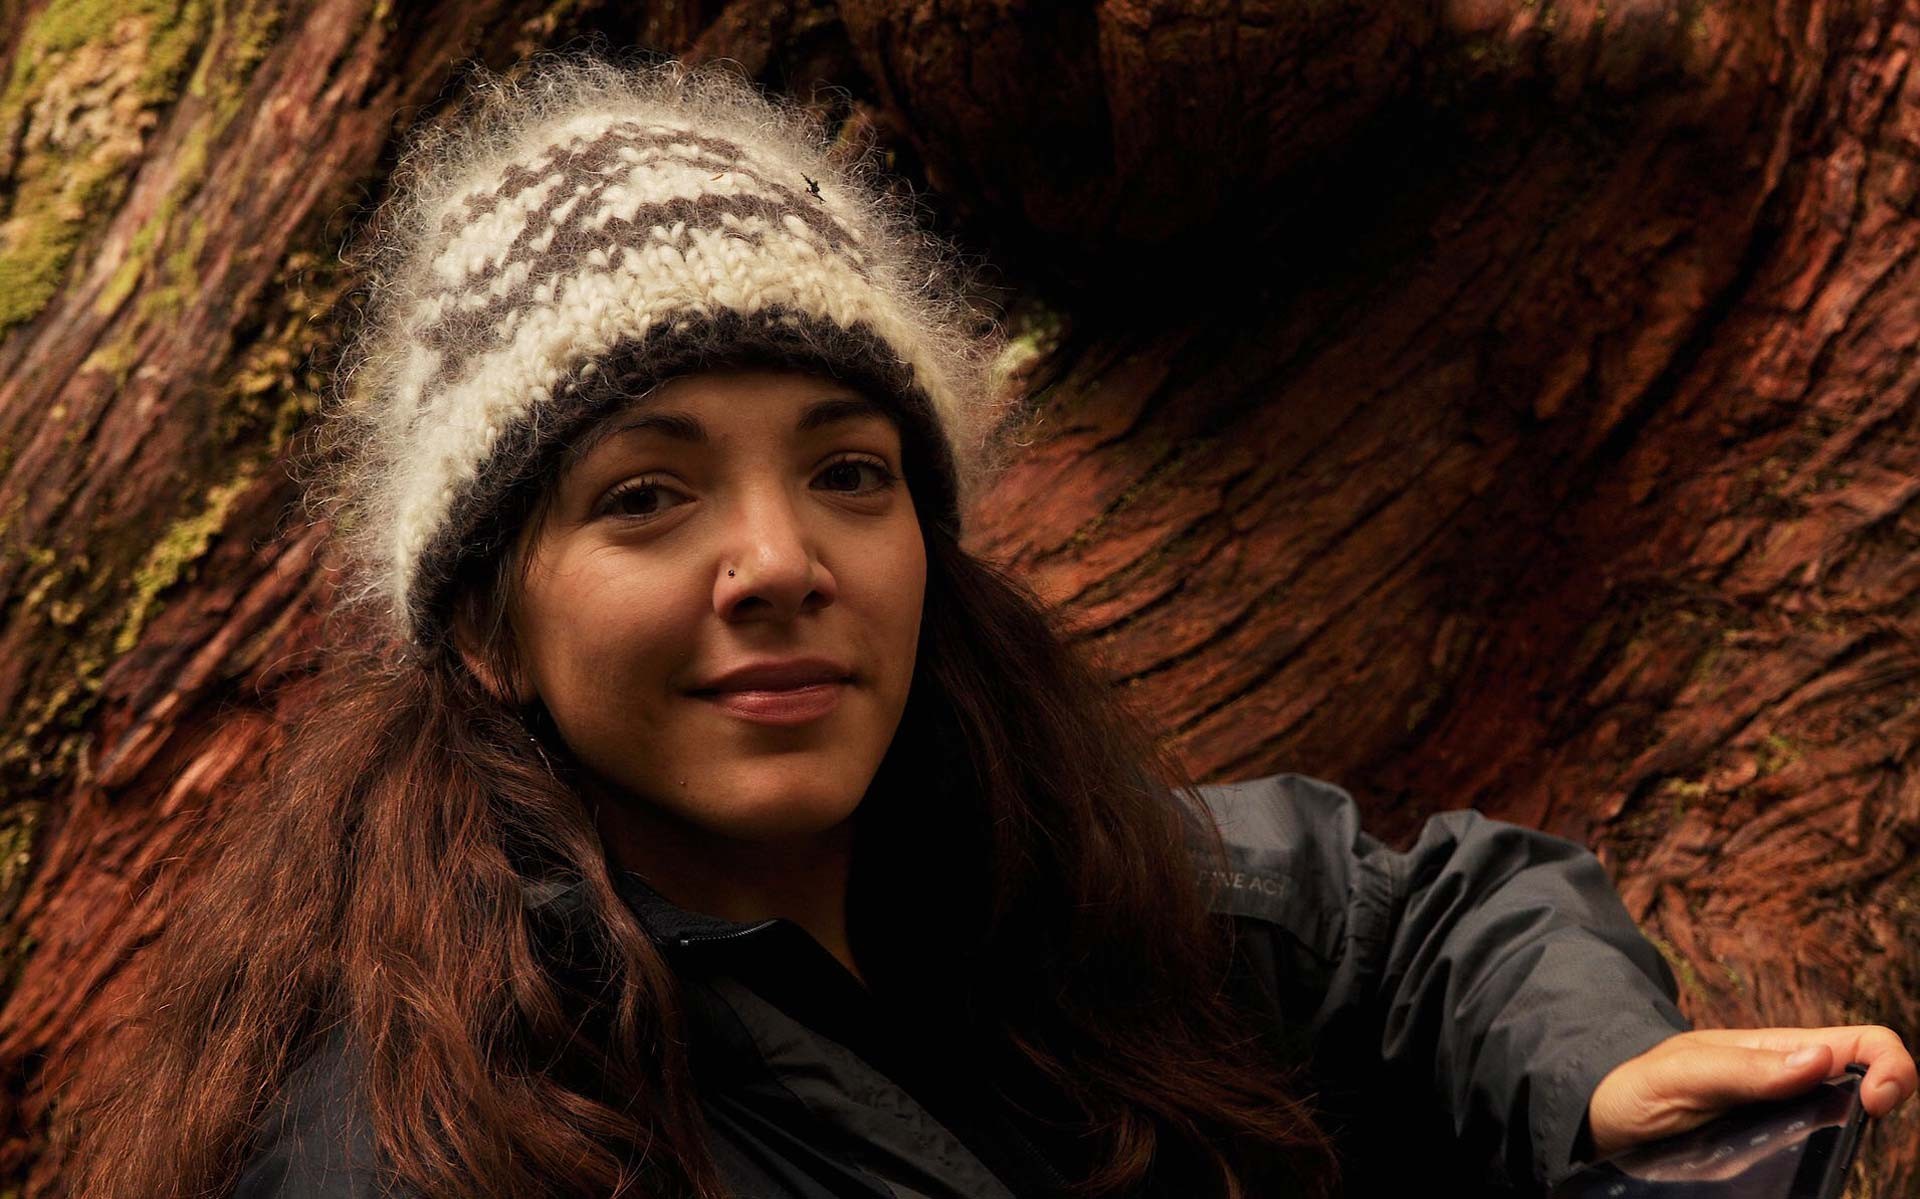 A smiling young woman in front on the trunk of an enormous tree, wearing a woollen beanie and a black jacket